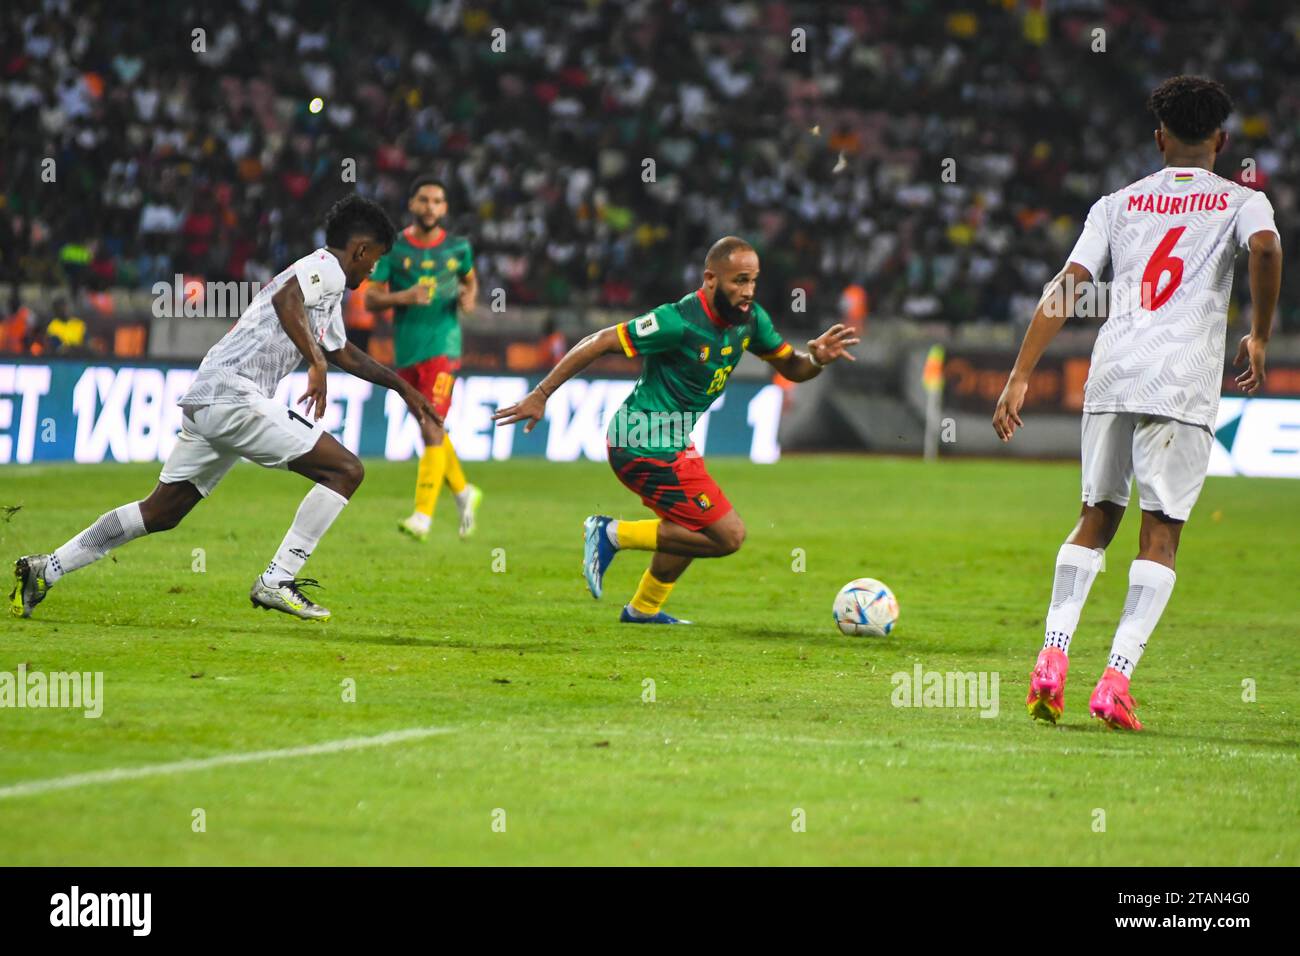 DOUALA, CAMEROON - NOVEMBER 17:  Bryan Mbeumo of Cameroon and Yannick Aristide of Mauritius during the 2026 FIFA World Cup Qualifiers match between Ca Stock Photo